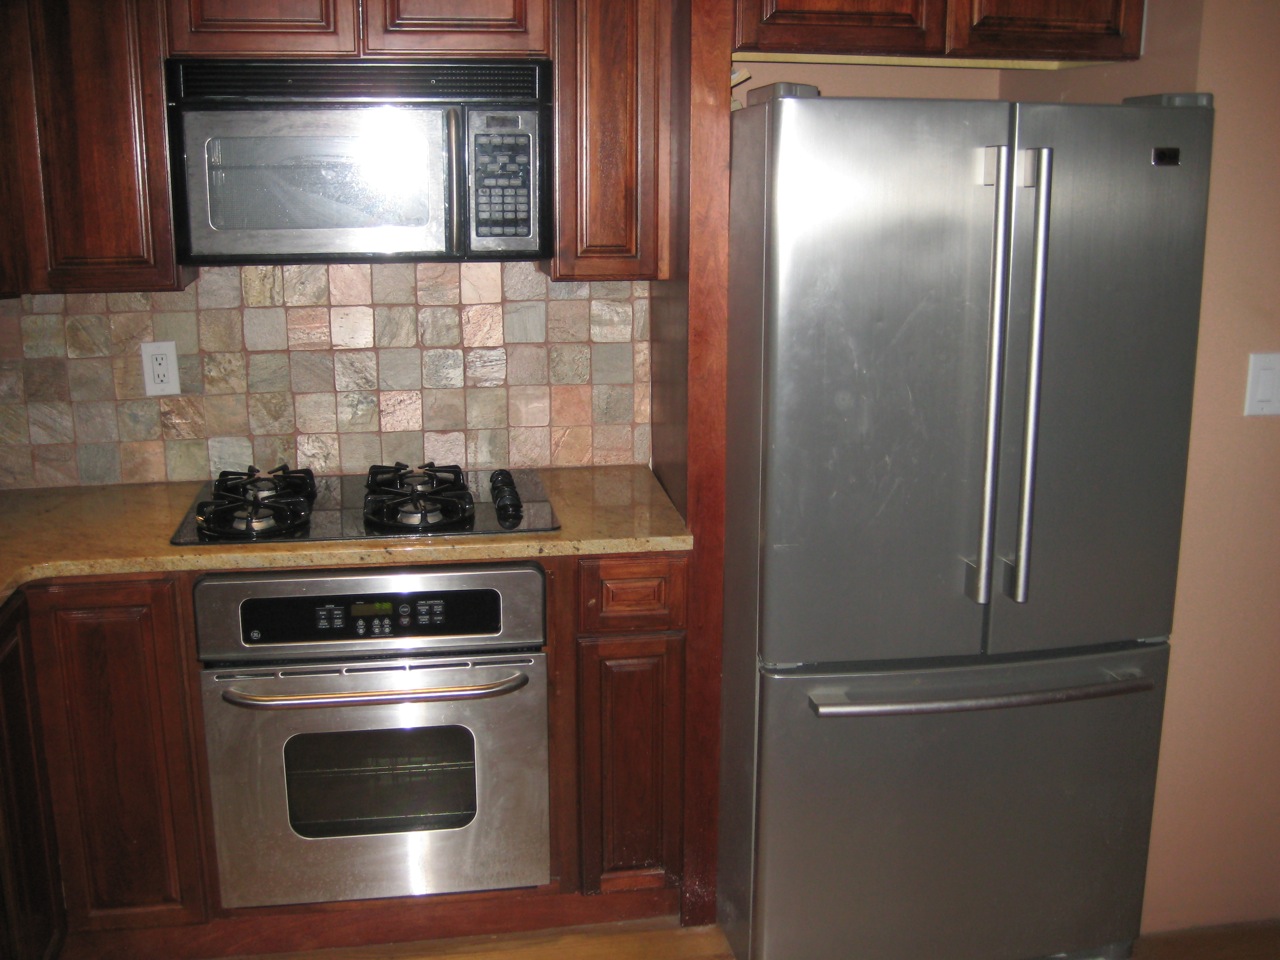 a kitchen has stainless steel appliances, wood cabinets, and tile backsplash